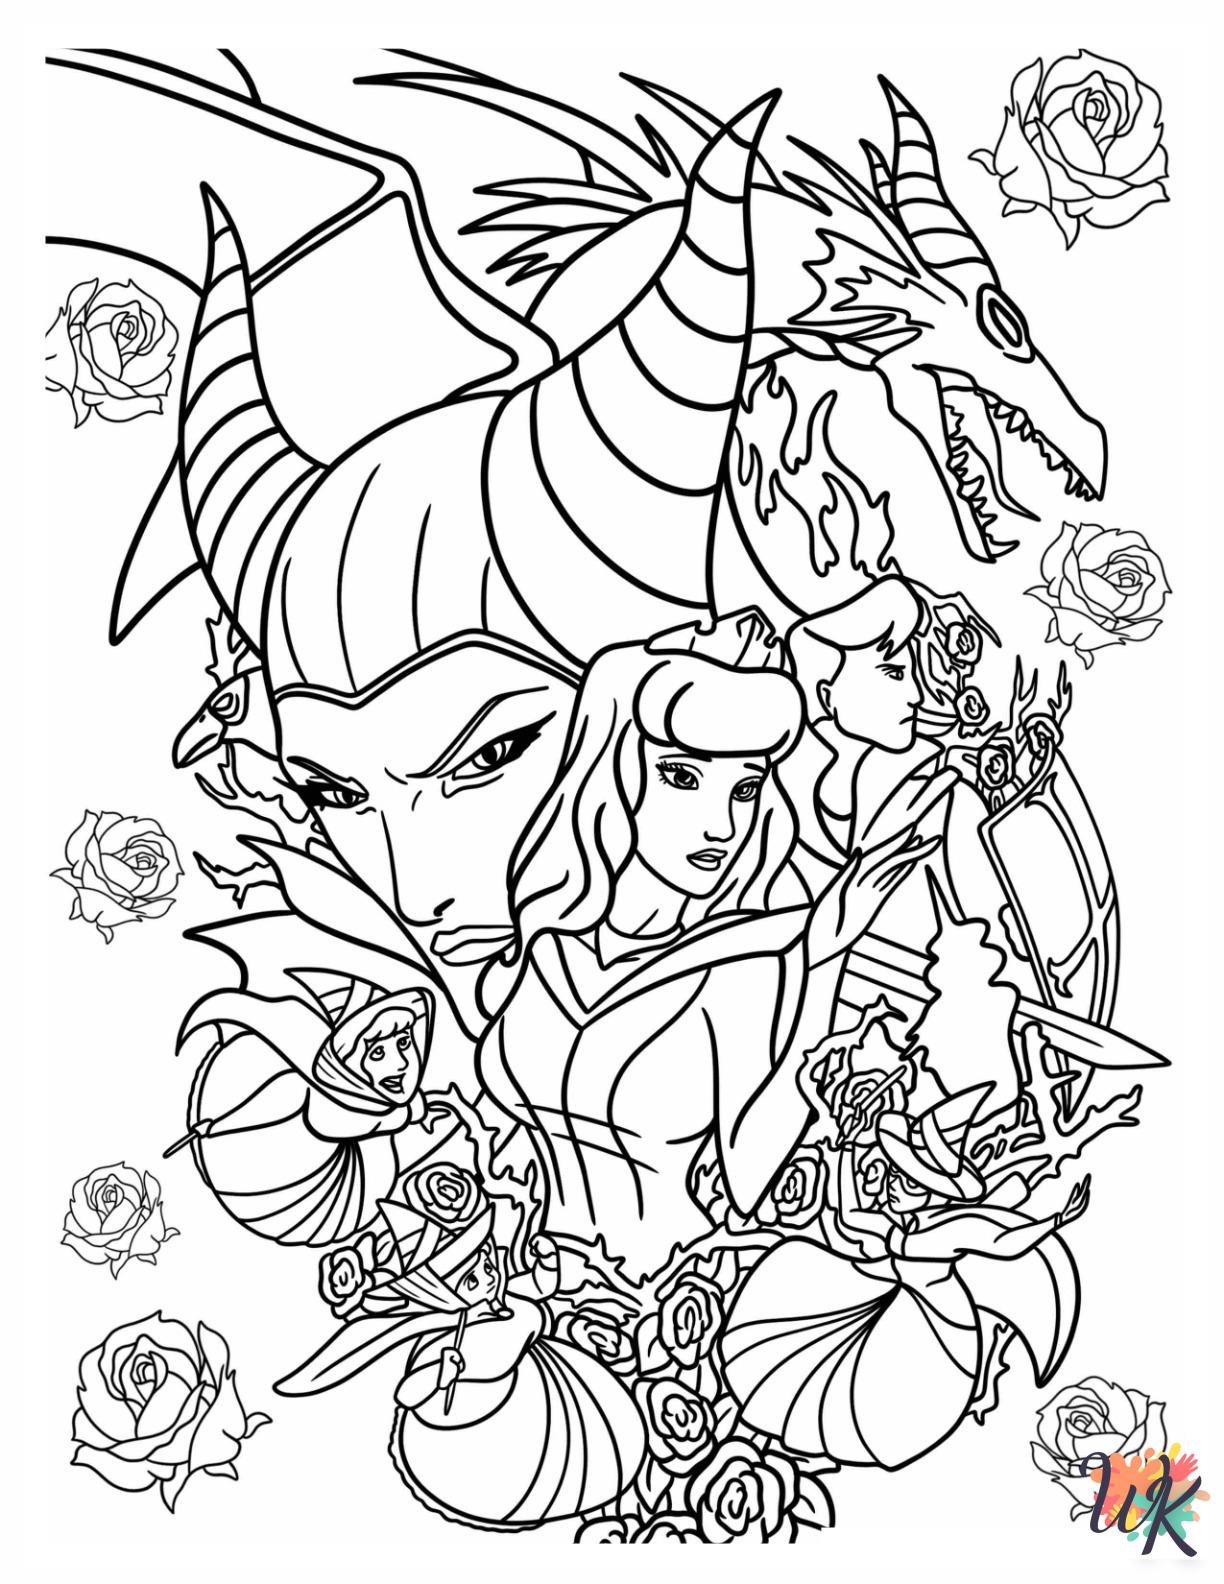 Maleficent ornament coloring pages